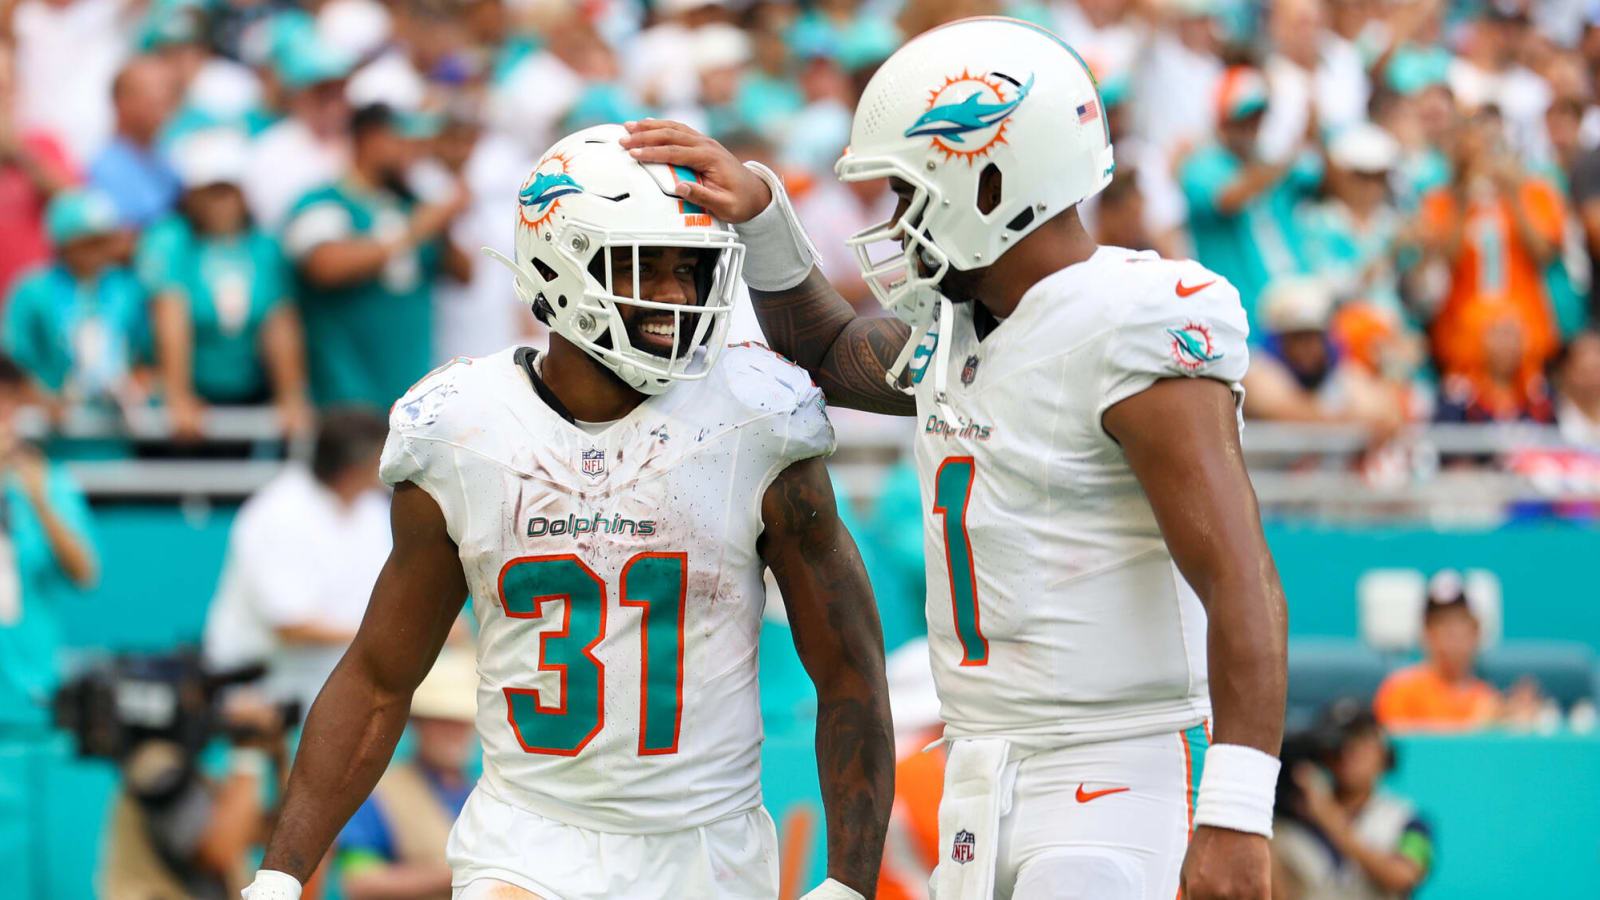 The Dolphins offense will change the NFL